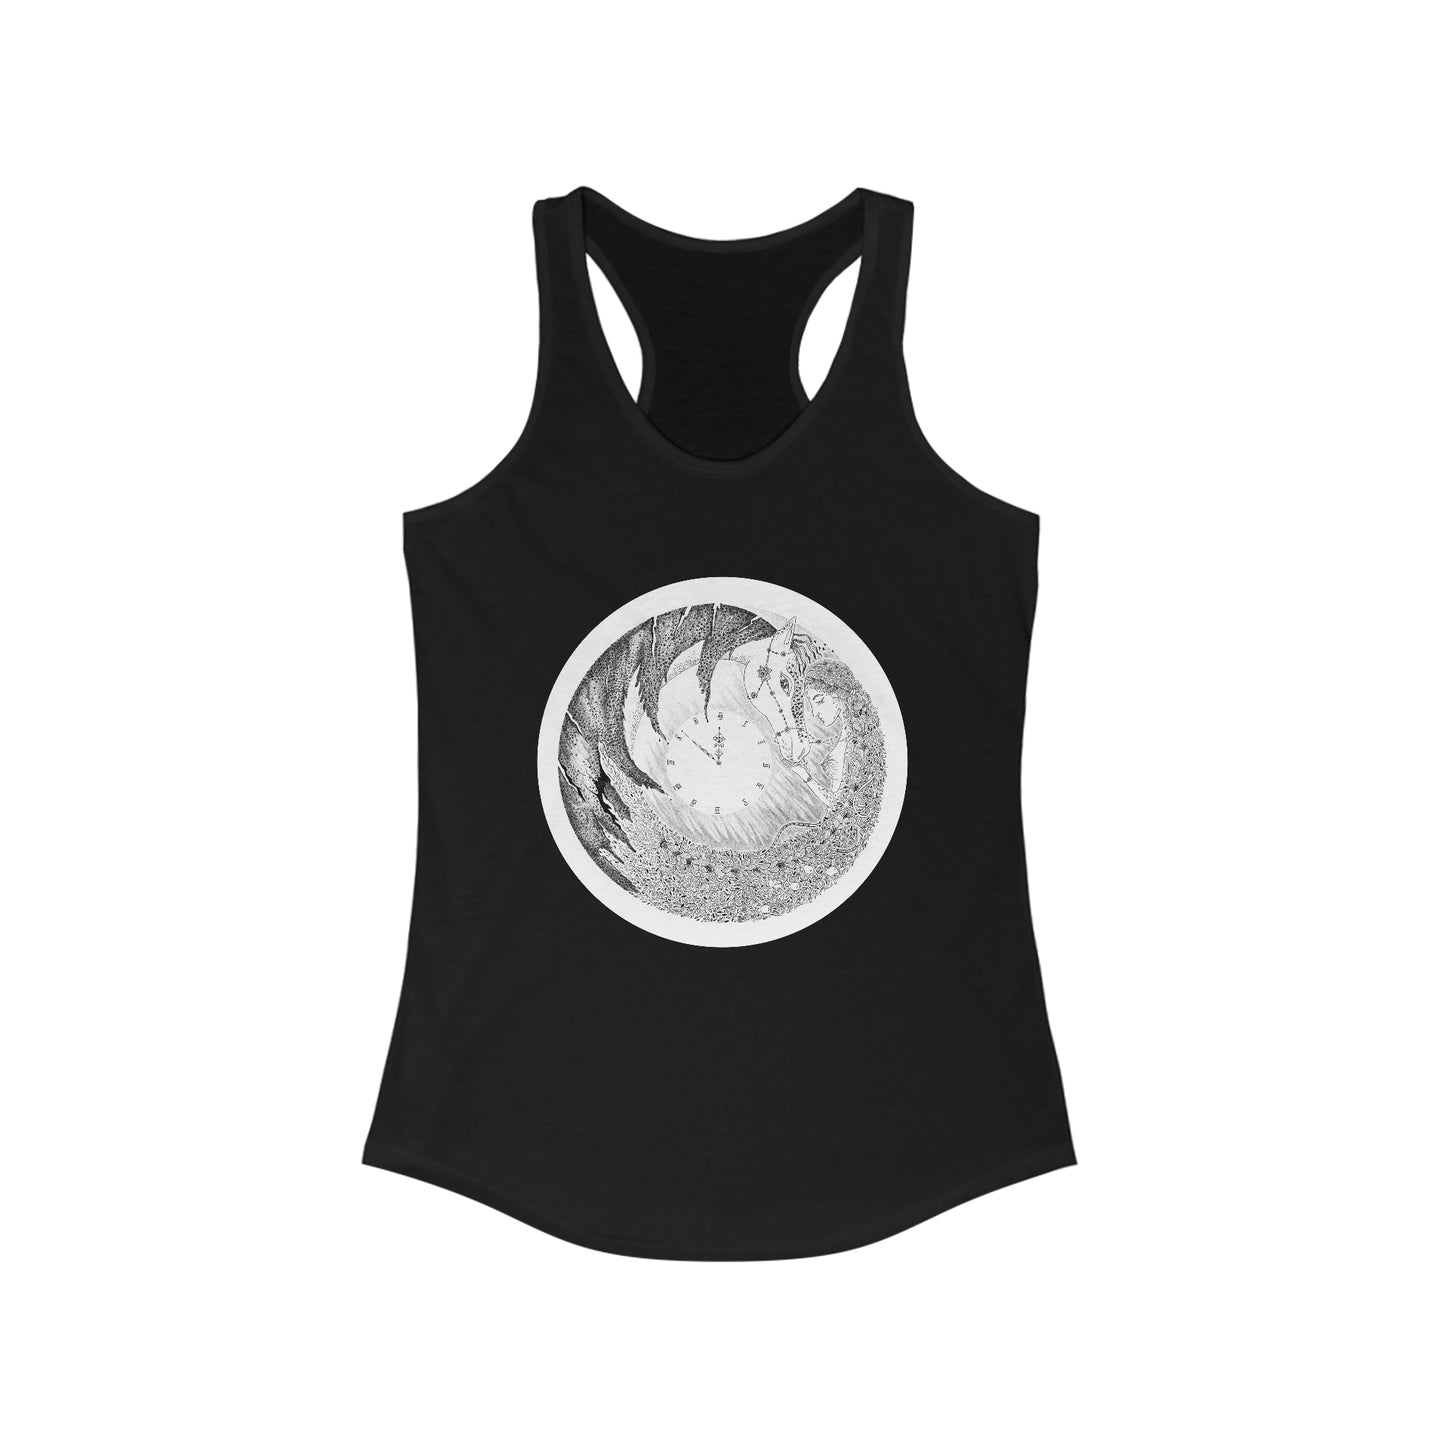 Chinese Zodiac Sign Tank Top (Horse) Limited Edition